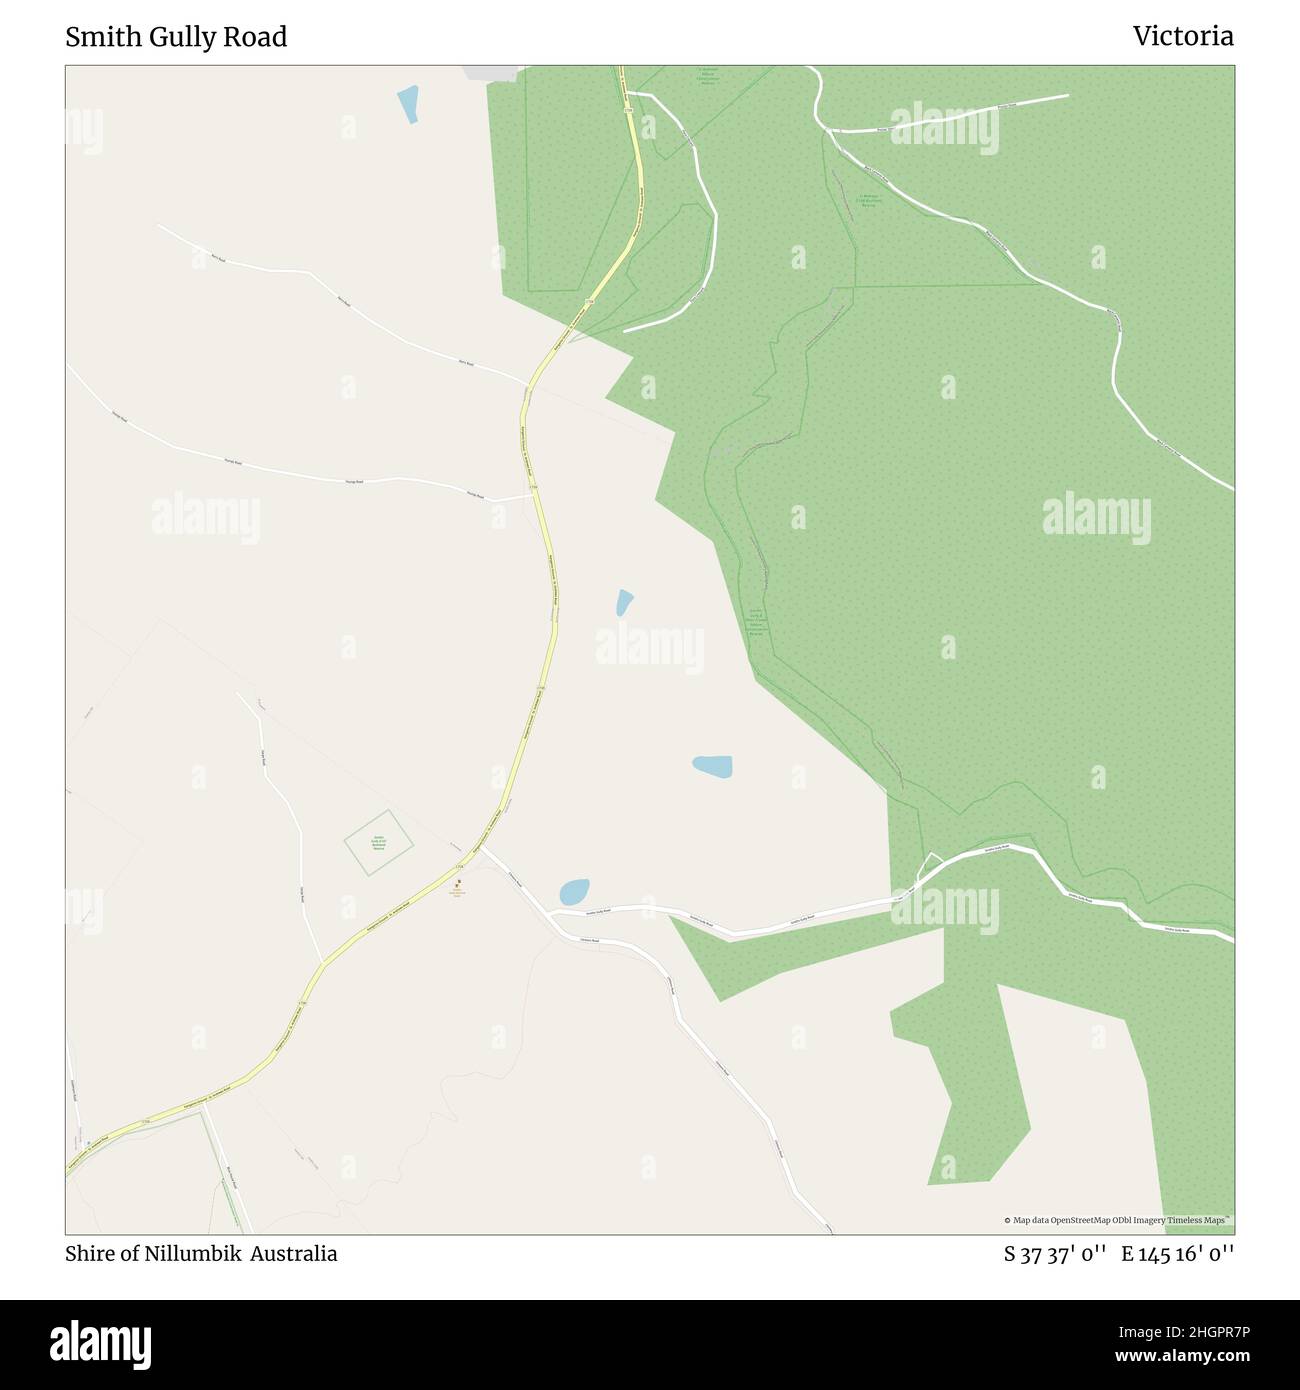 Smith Gully Road, Shire of Nillumbik, Australia, Victoria, S 37 37' 0'', E 145 16' 0'', map, Timeless Map published in 2021. Travelers, explorers and adventurers like Florence Nightingale, David Livingstone, Ernest Shackleton, Lewis and Clark and Sherlock Holmes relied on maps to plan travels to the world's most remote corners, Timeless Maps is mapping most locations on the globe, showing the achievement of great dreams Stock Photo